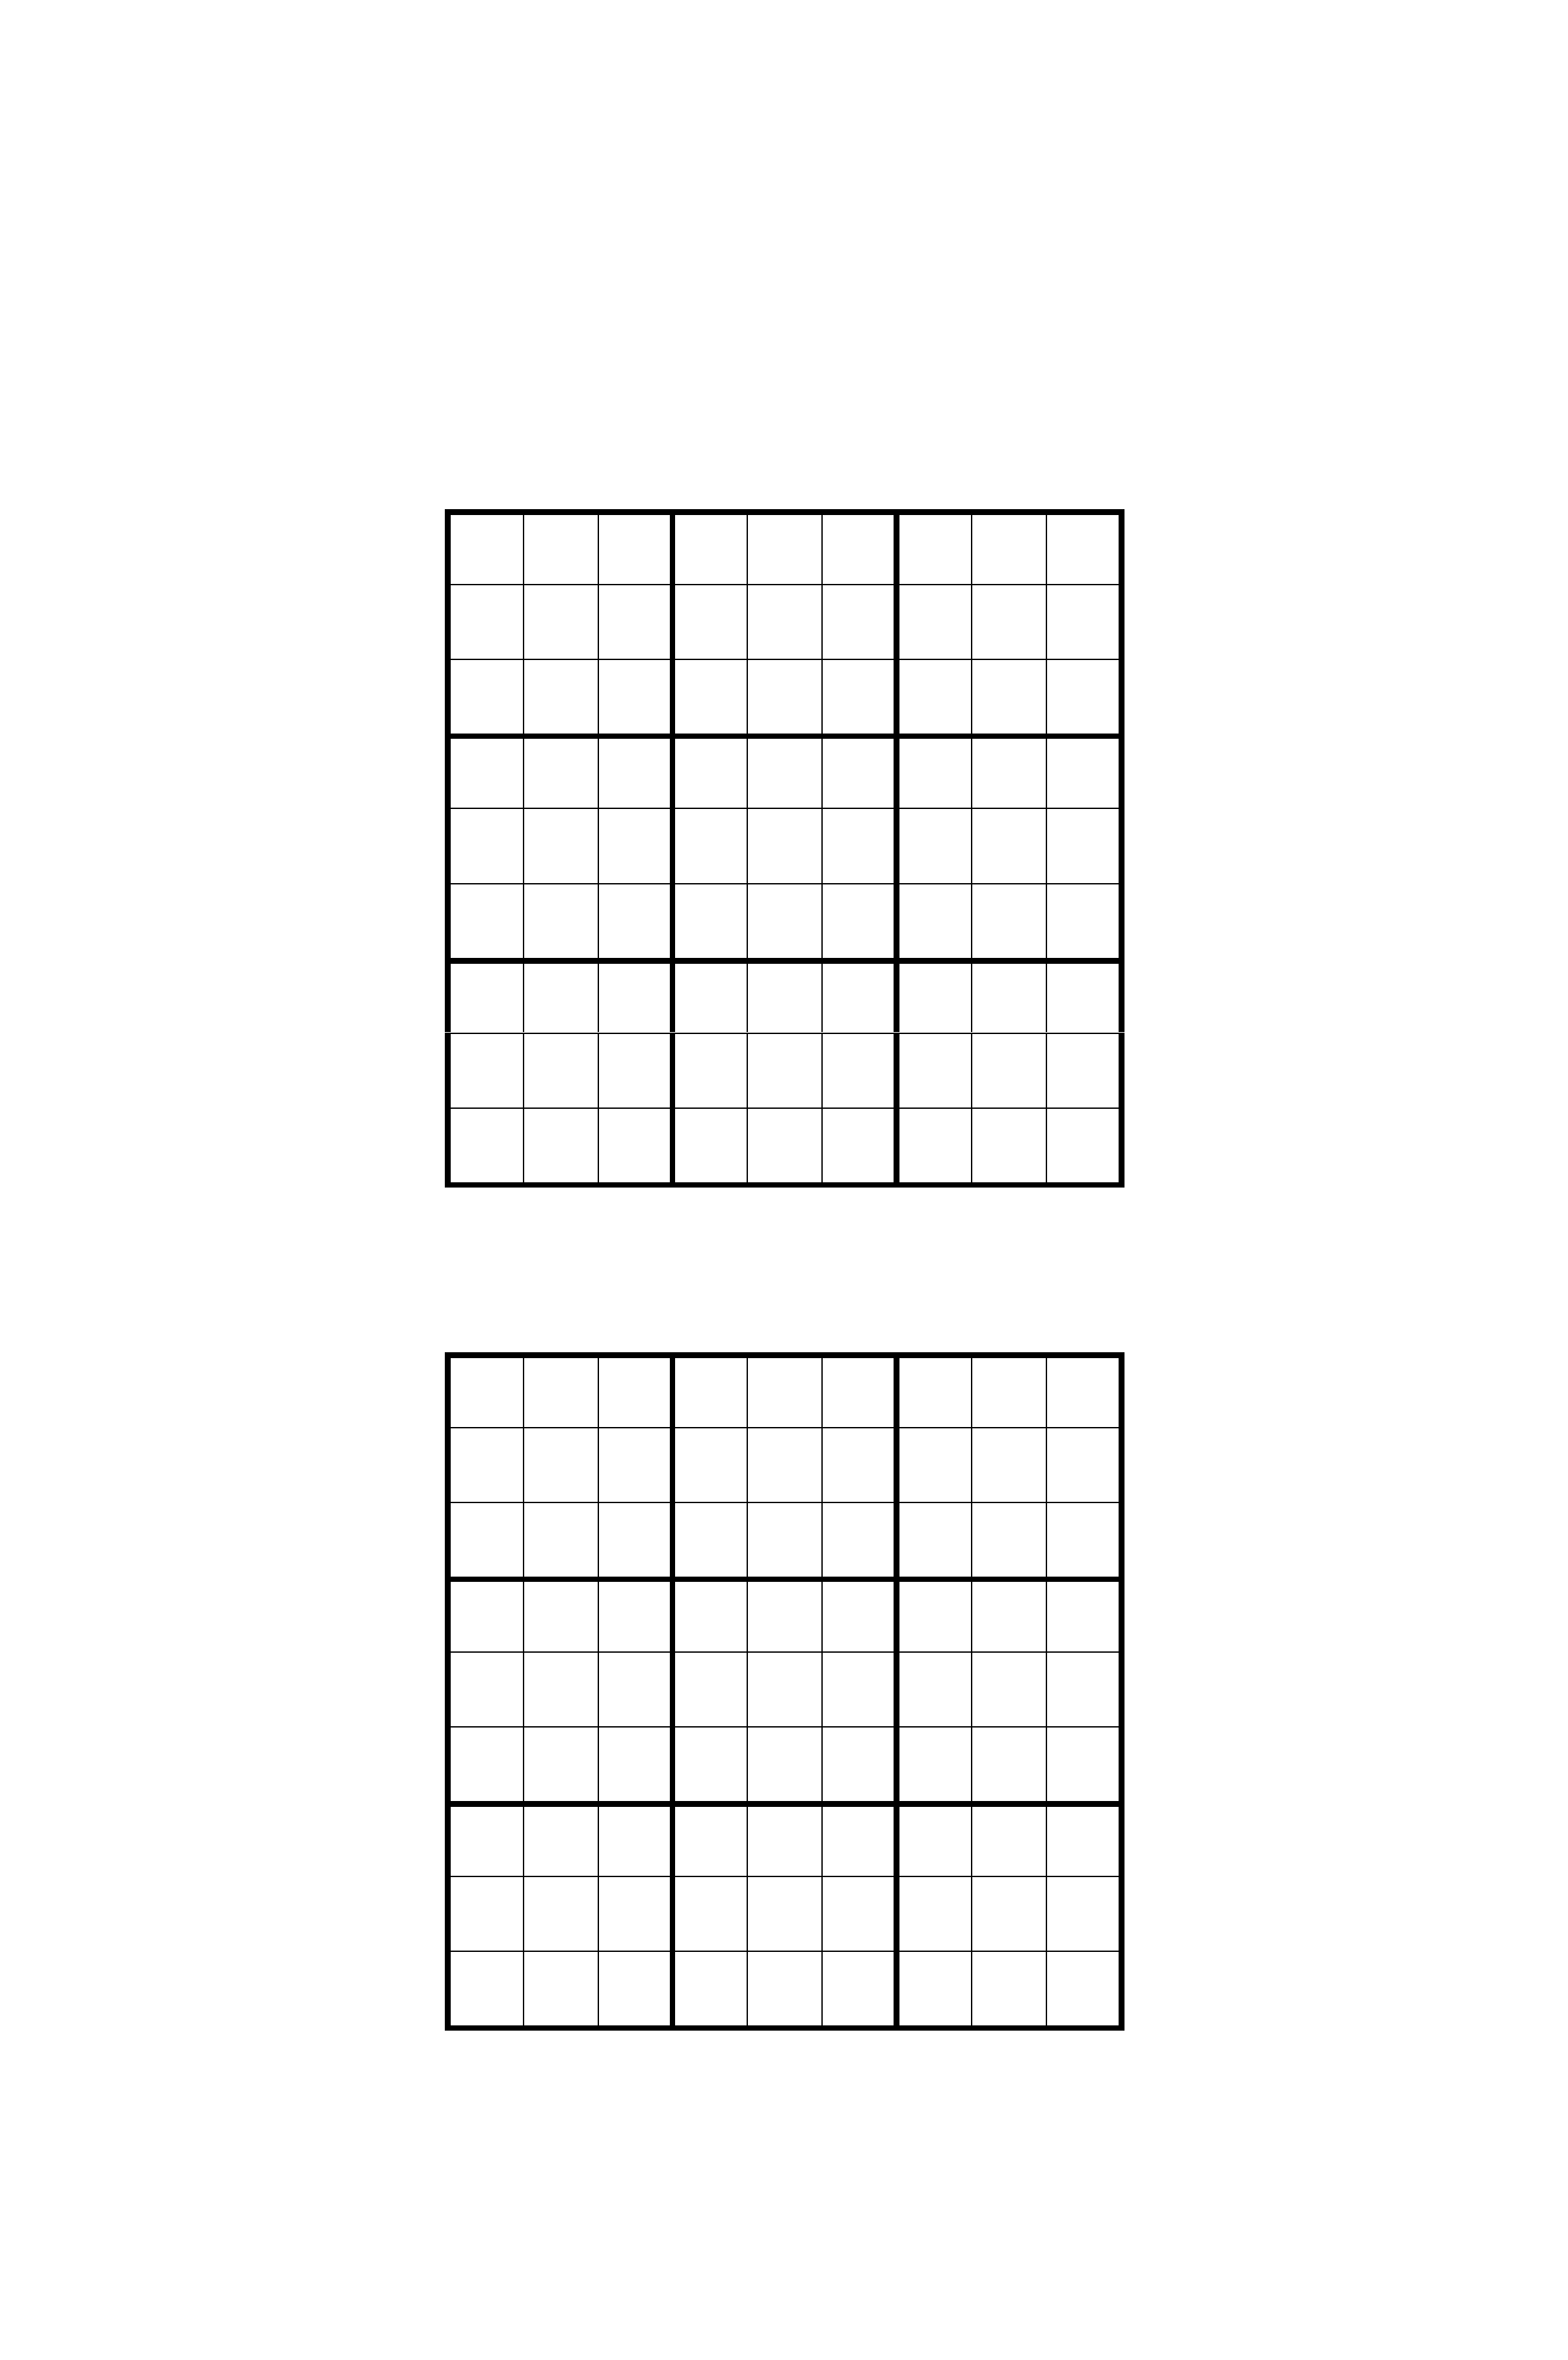 Sudoku Grids Template Free Download